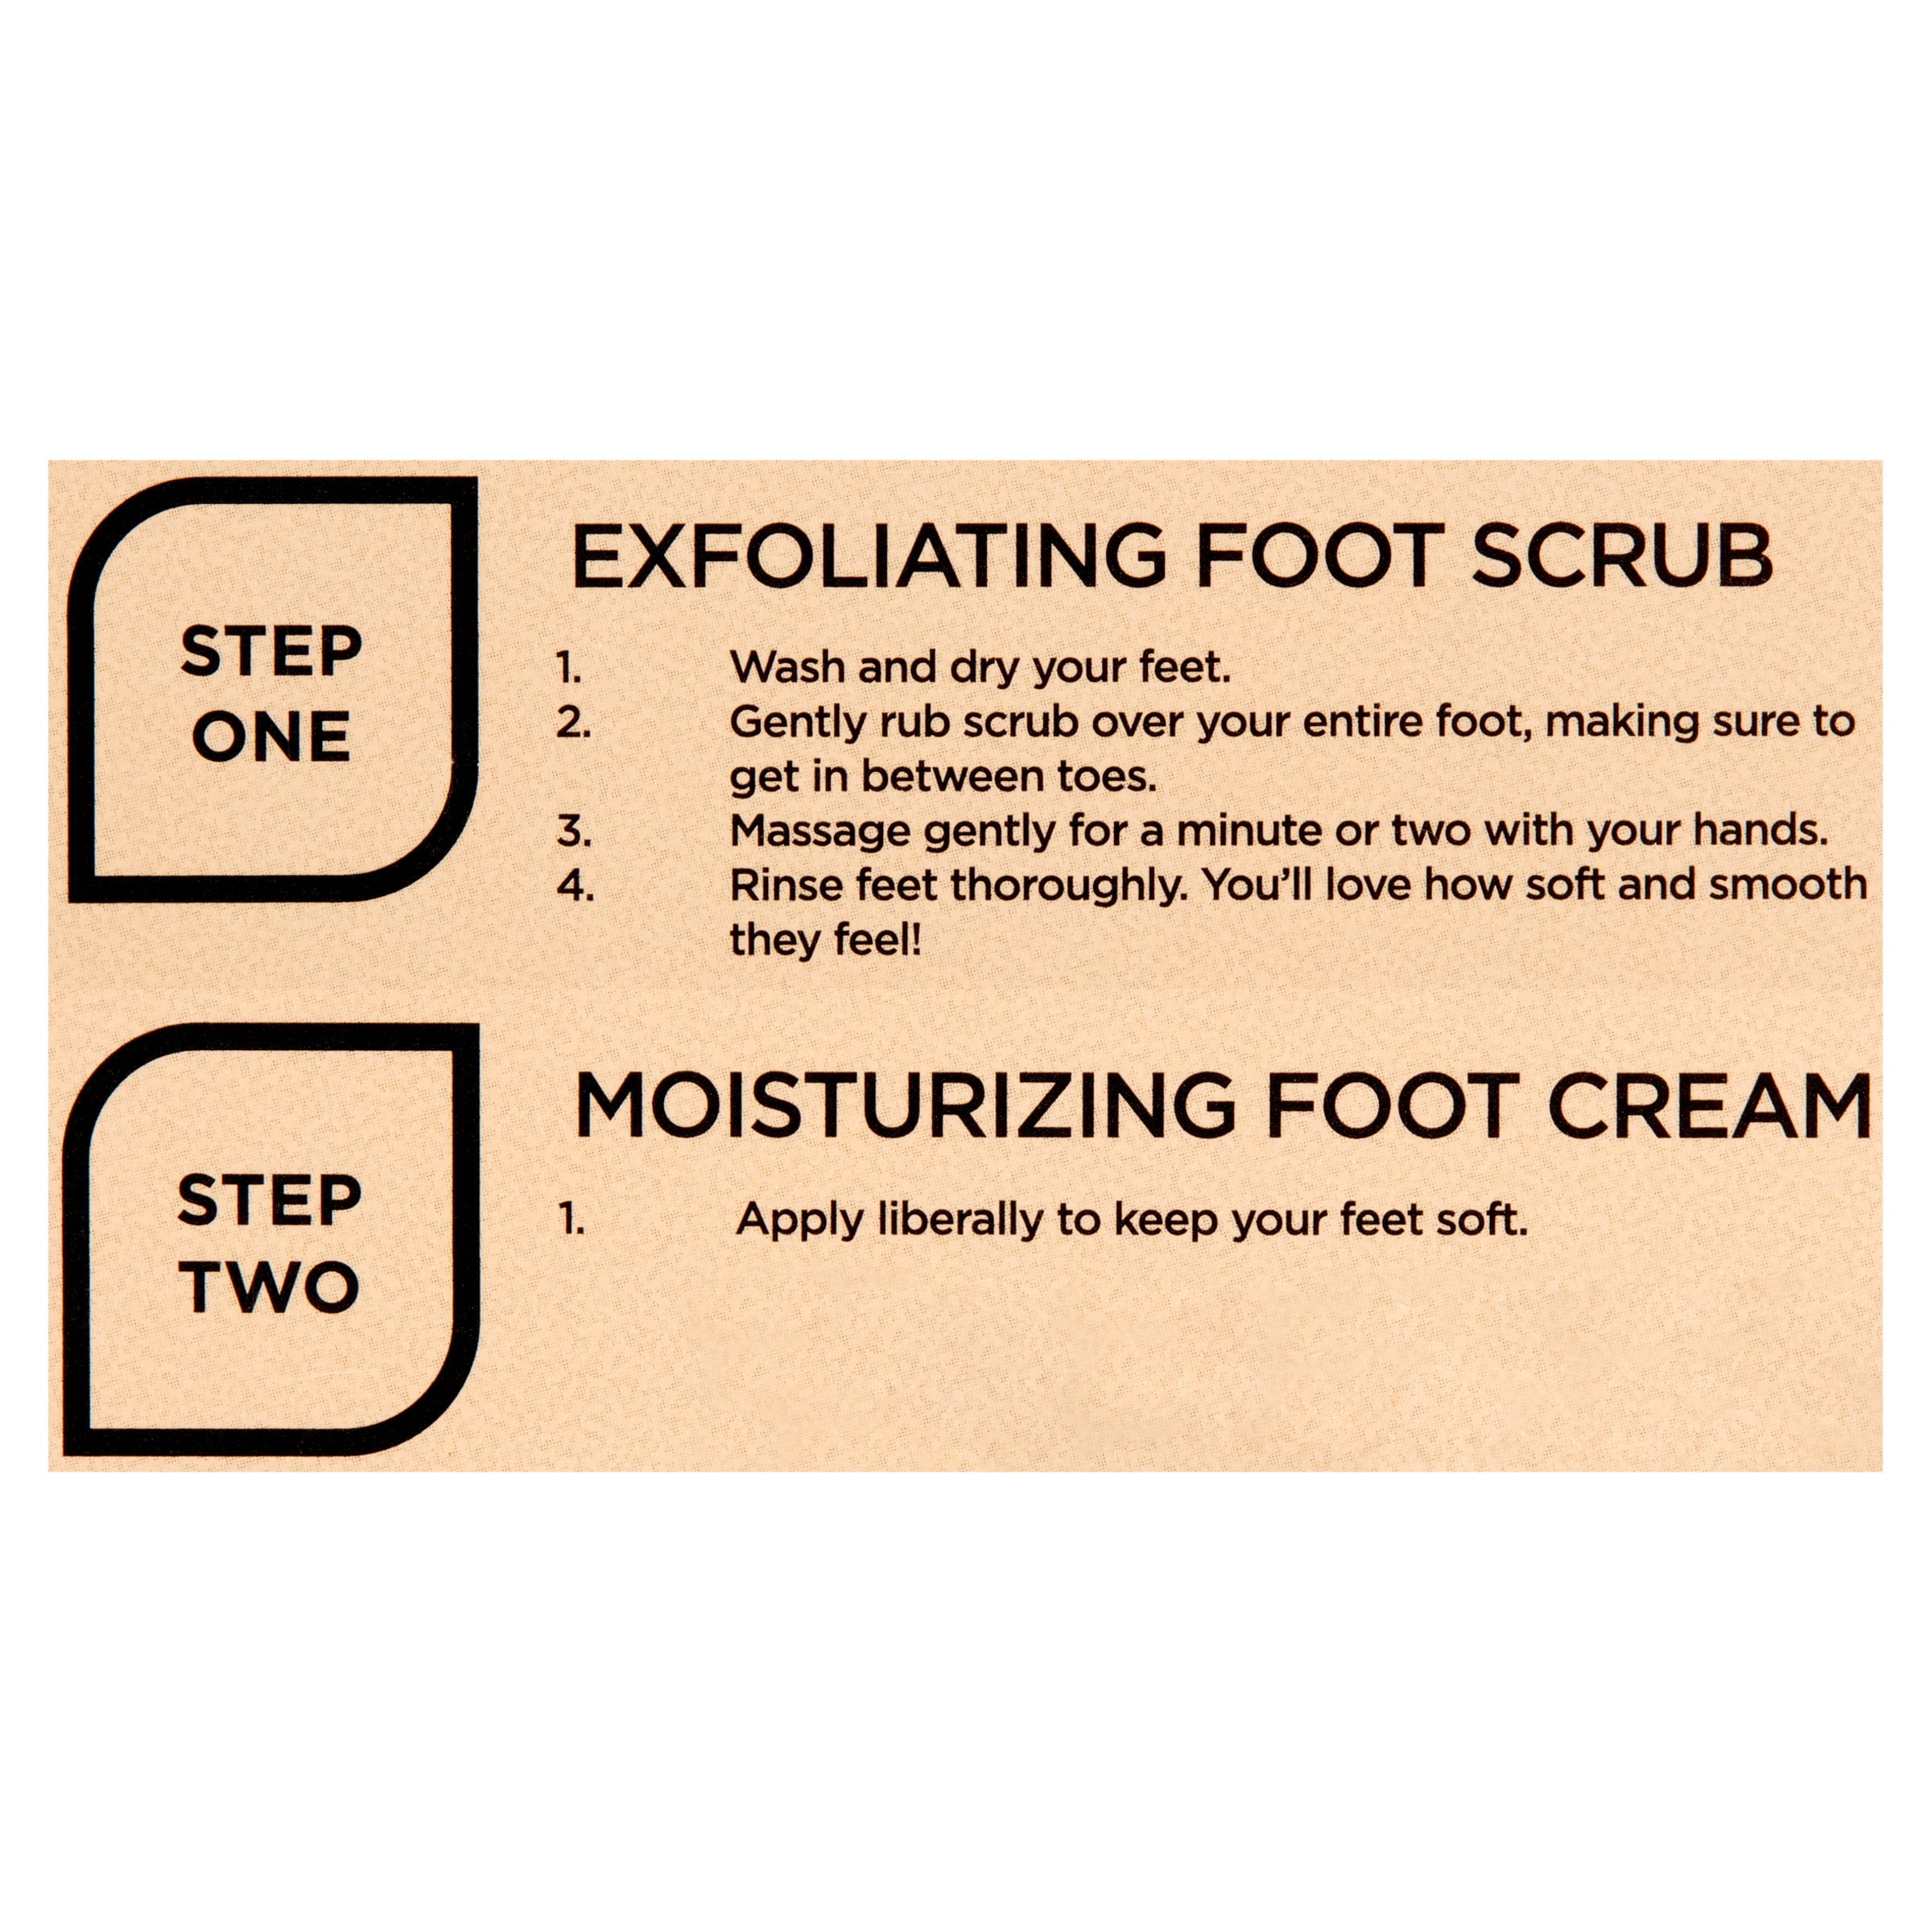 RED by Kiss Foot Scrub for Dead Skin – Exfoliates, Moisturizes, Nourishes  Dry and Cracked Heels, Use with Foot Scrubber for Pedicure 5.3 oz.